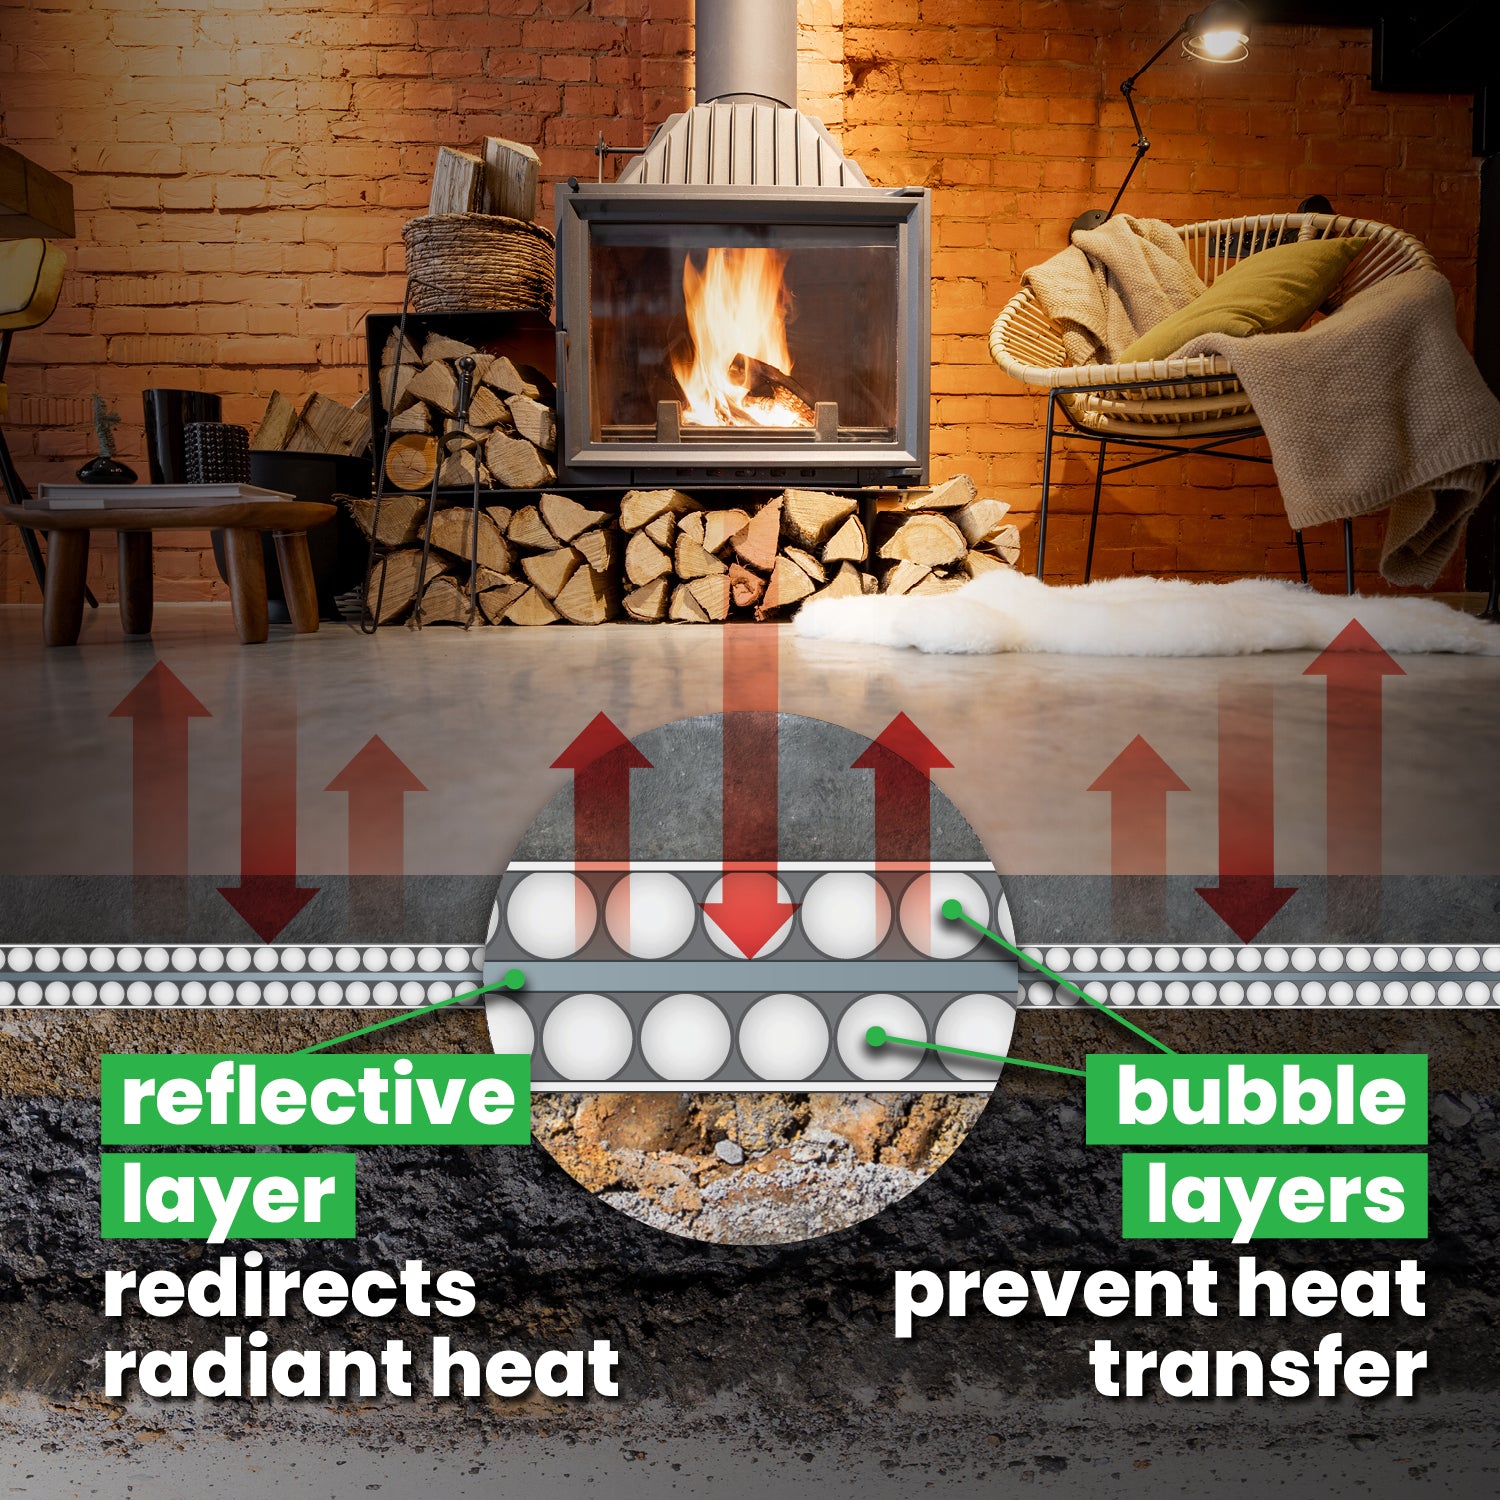 Under slab bubble insulation reflects radiant heat, preventing heat transfer